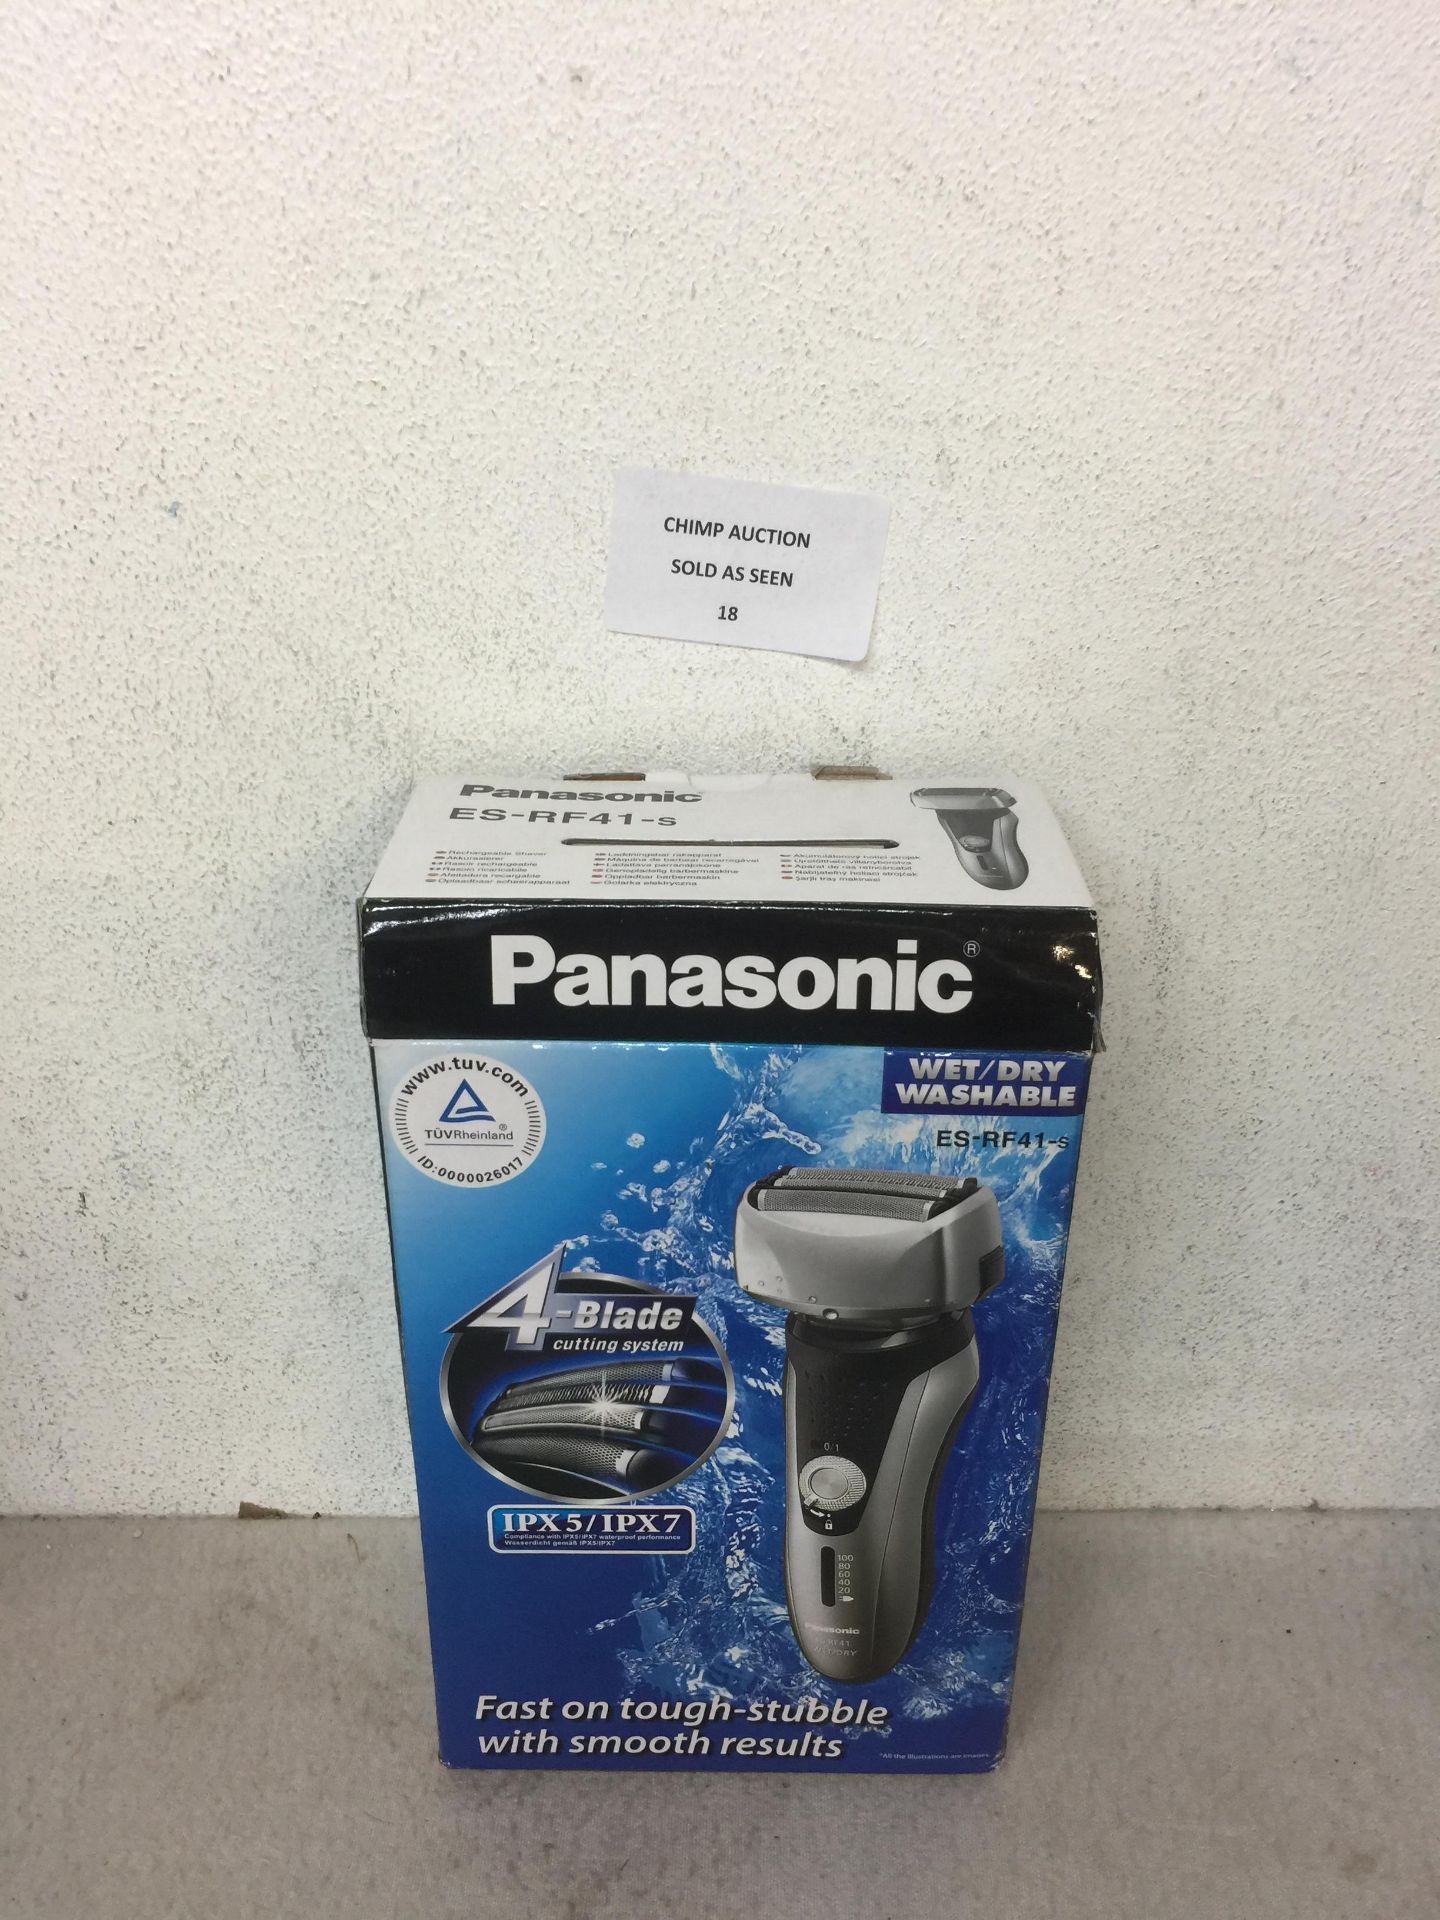 Panasonic ES-RF41 Rechargeable 4-Blade Electric Shaver